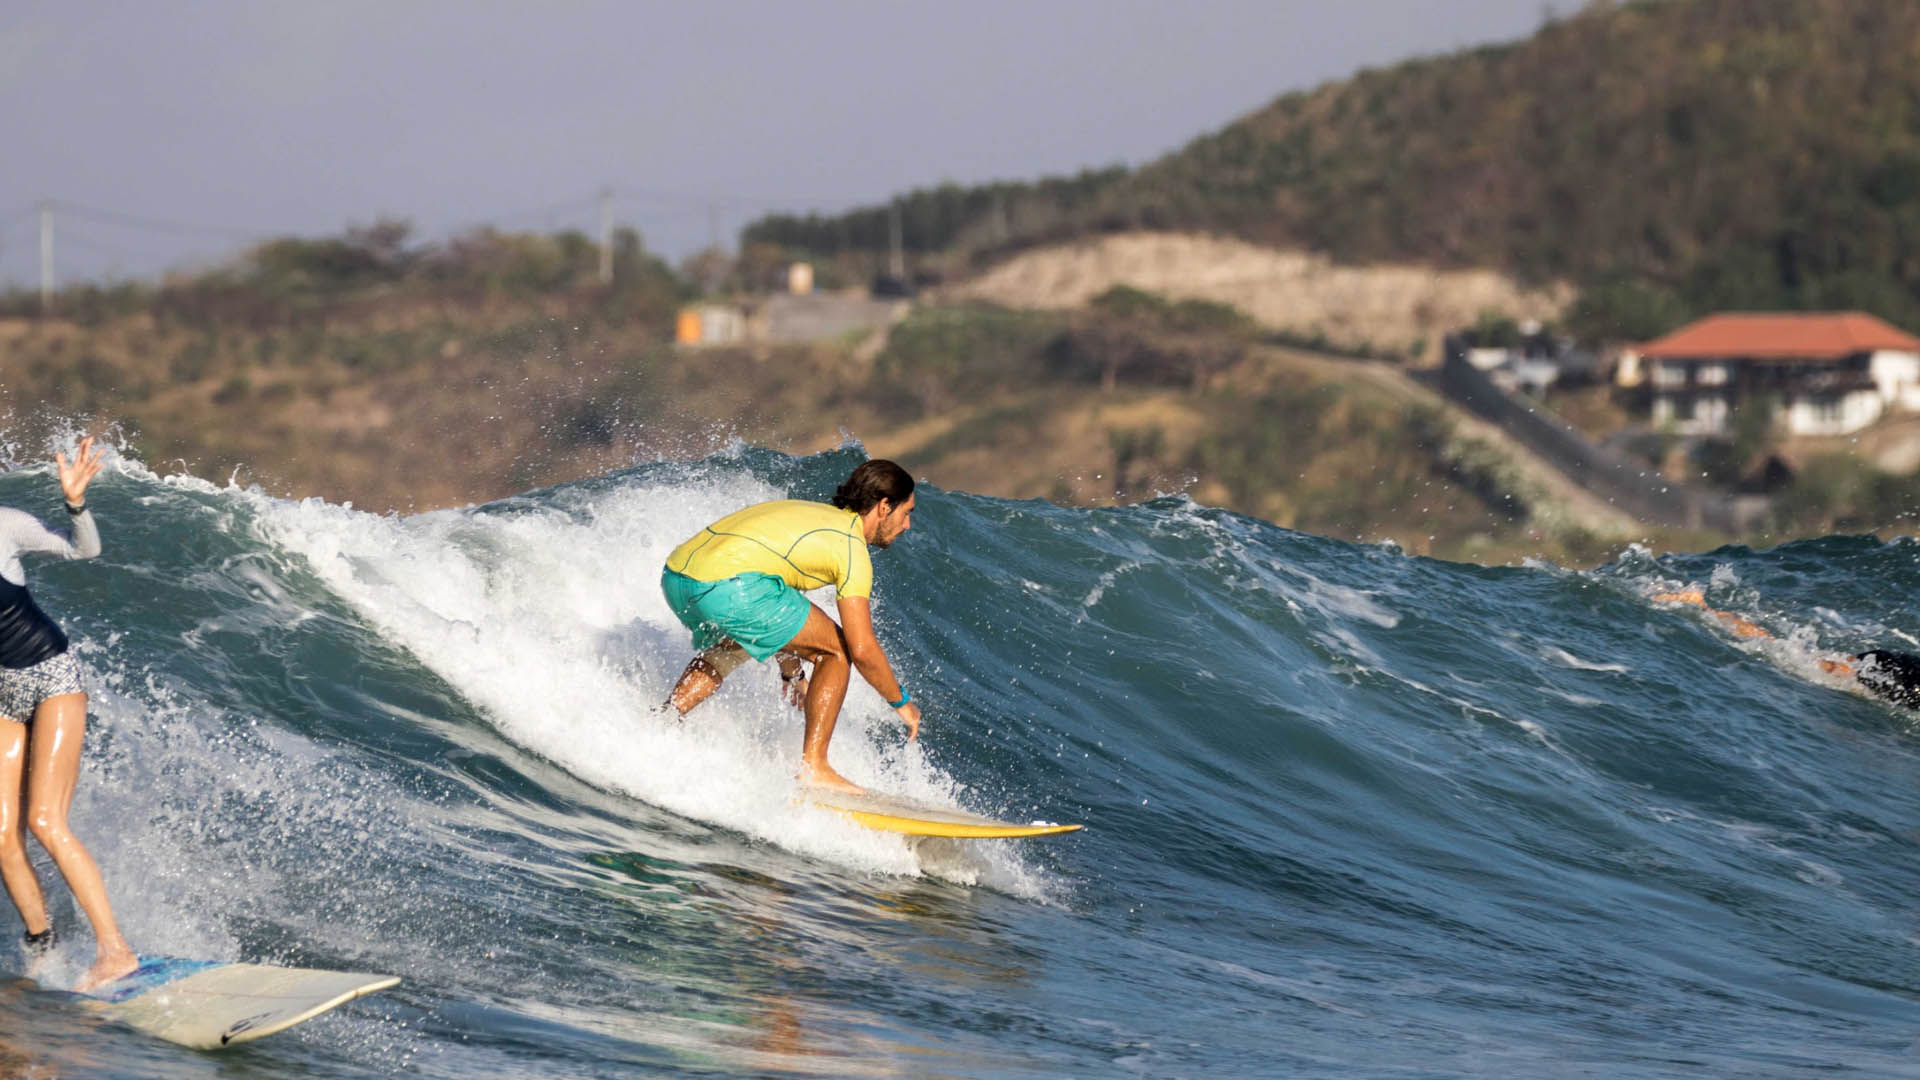 Ride the Best Waves - 10 Bali Surf Spots to Check Out